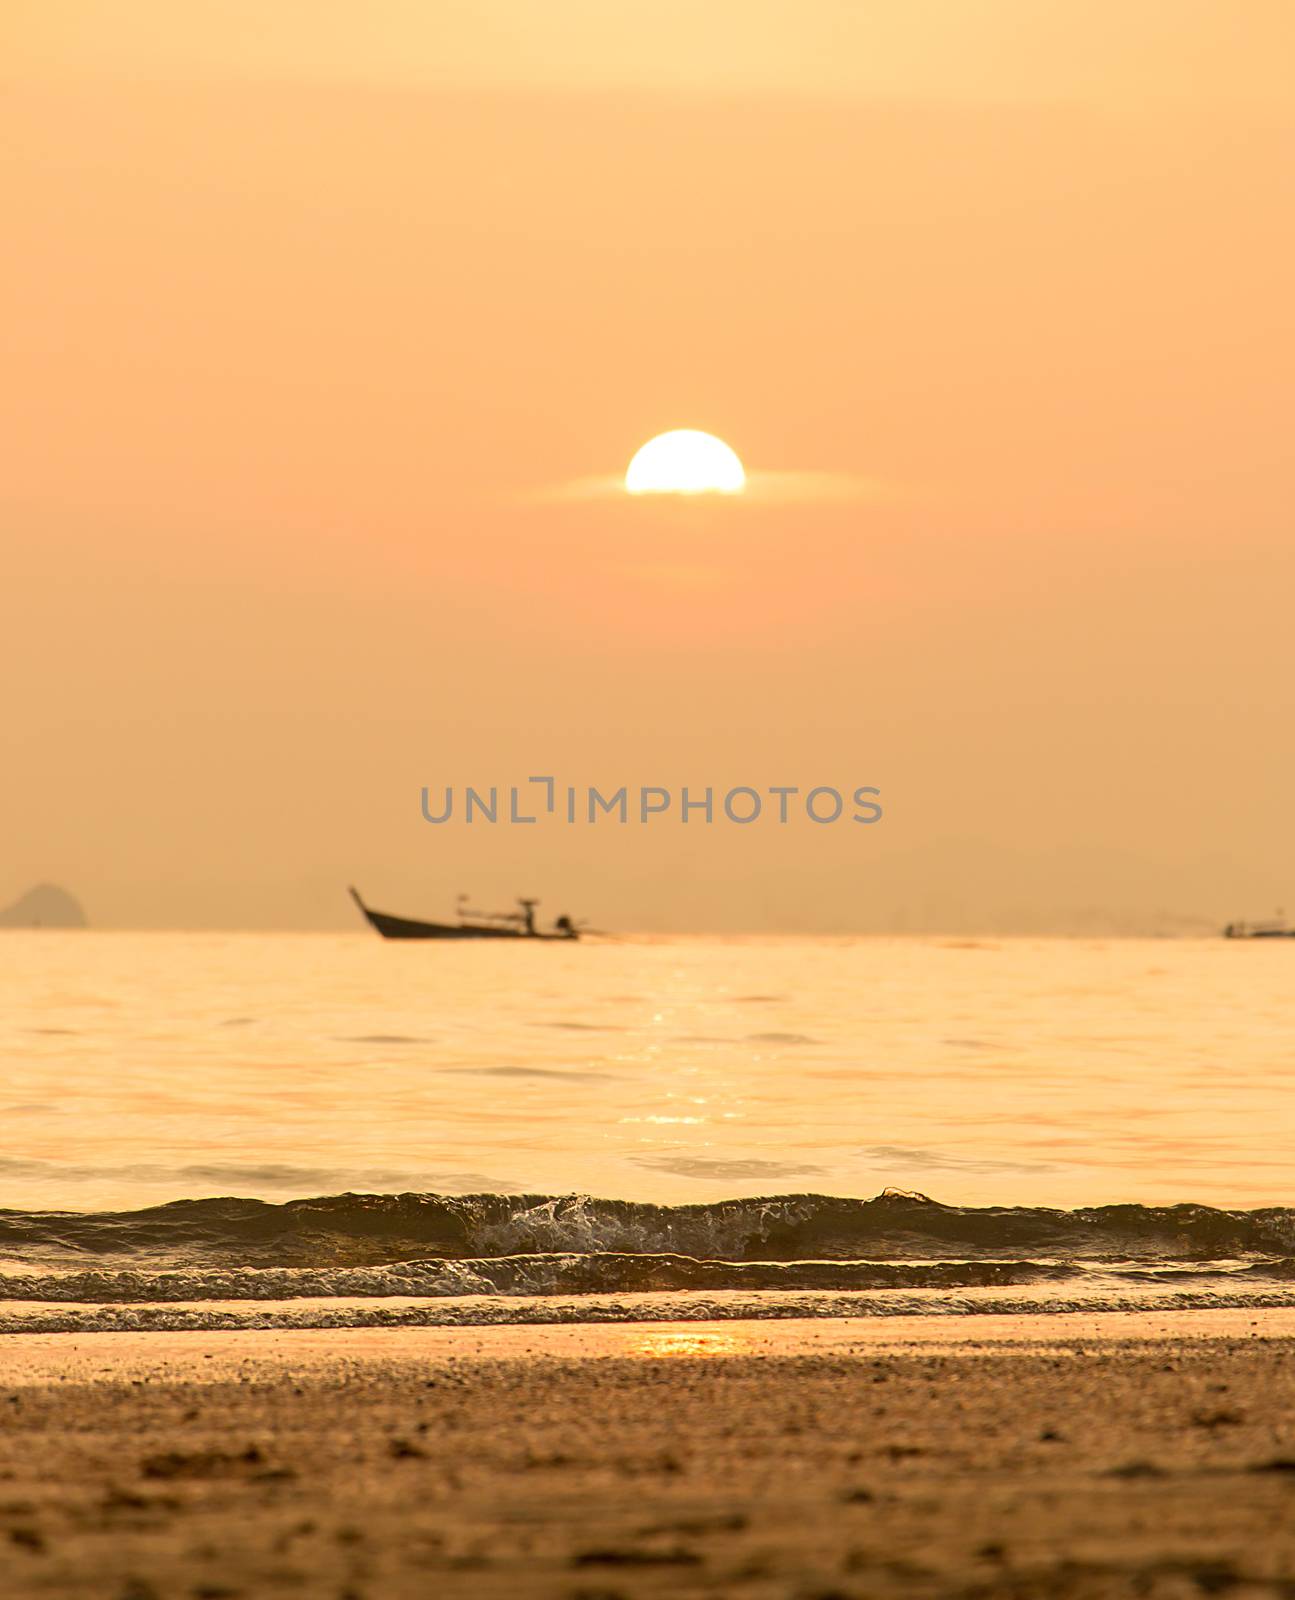 Sunset Beach In Thailand With Sea And Longtail Boat